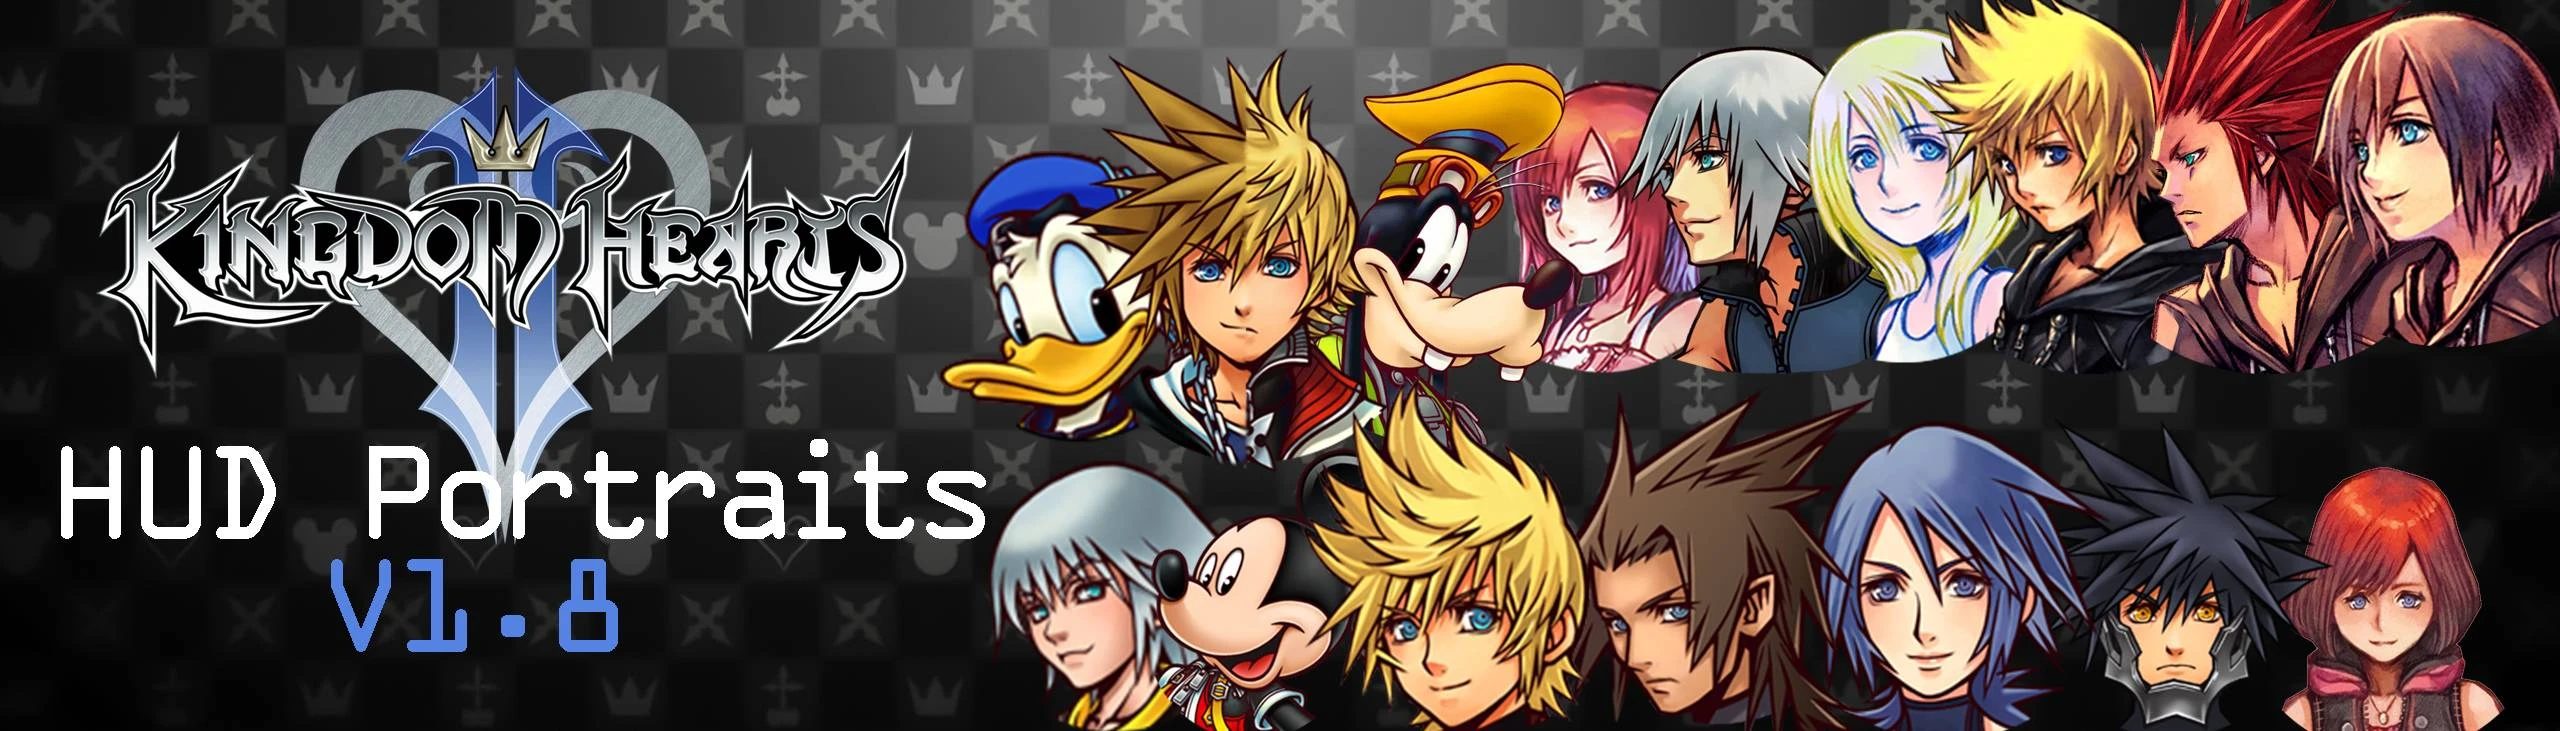 What the Heck Is Kingdom Hearts II.8?